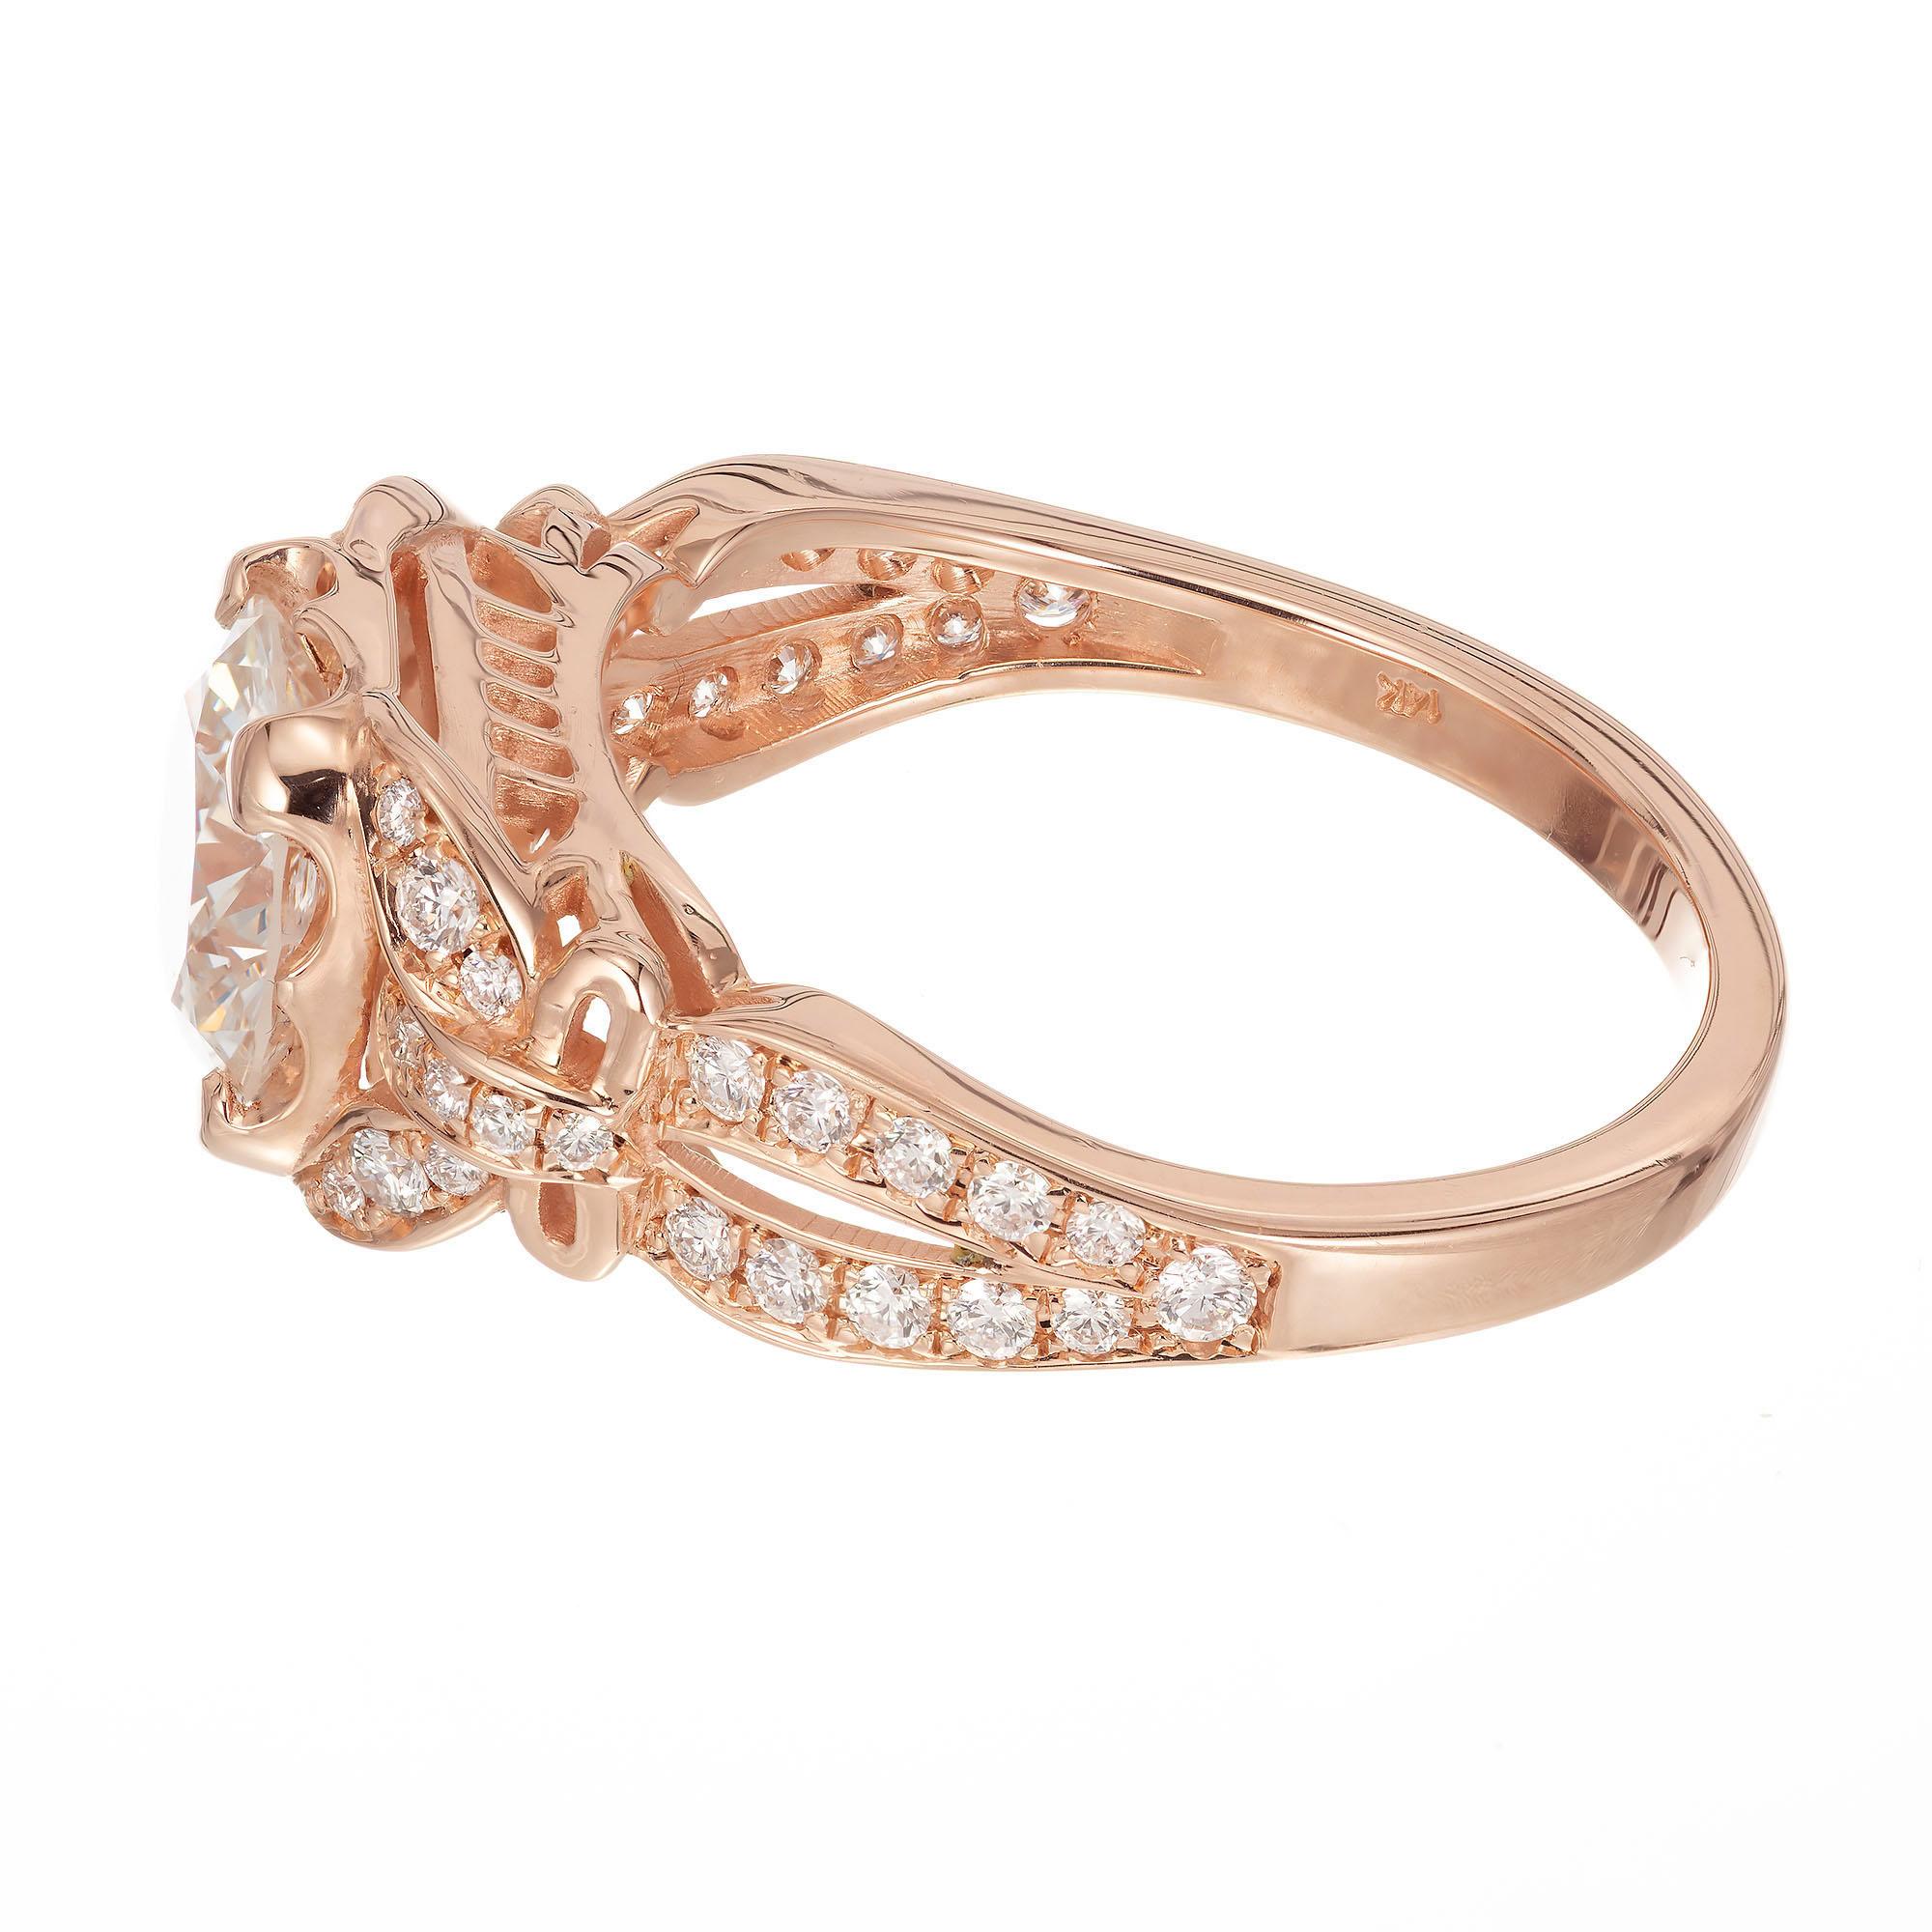 Peter Suchy GIA Certified 1.41 Carat Diamond Rose Gold Engagement Ring In New Condition For Sale In Stamford, CT